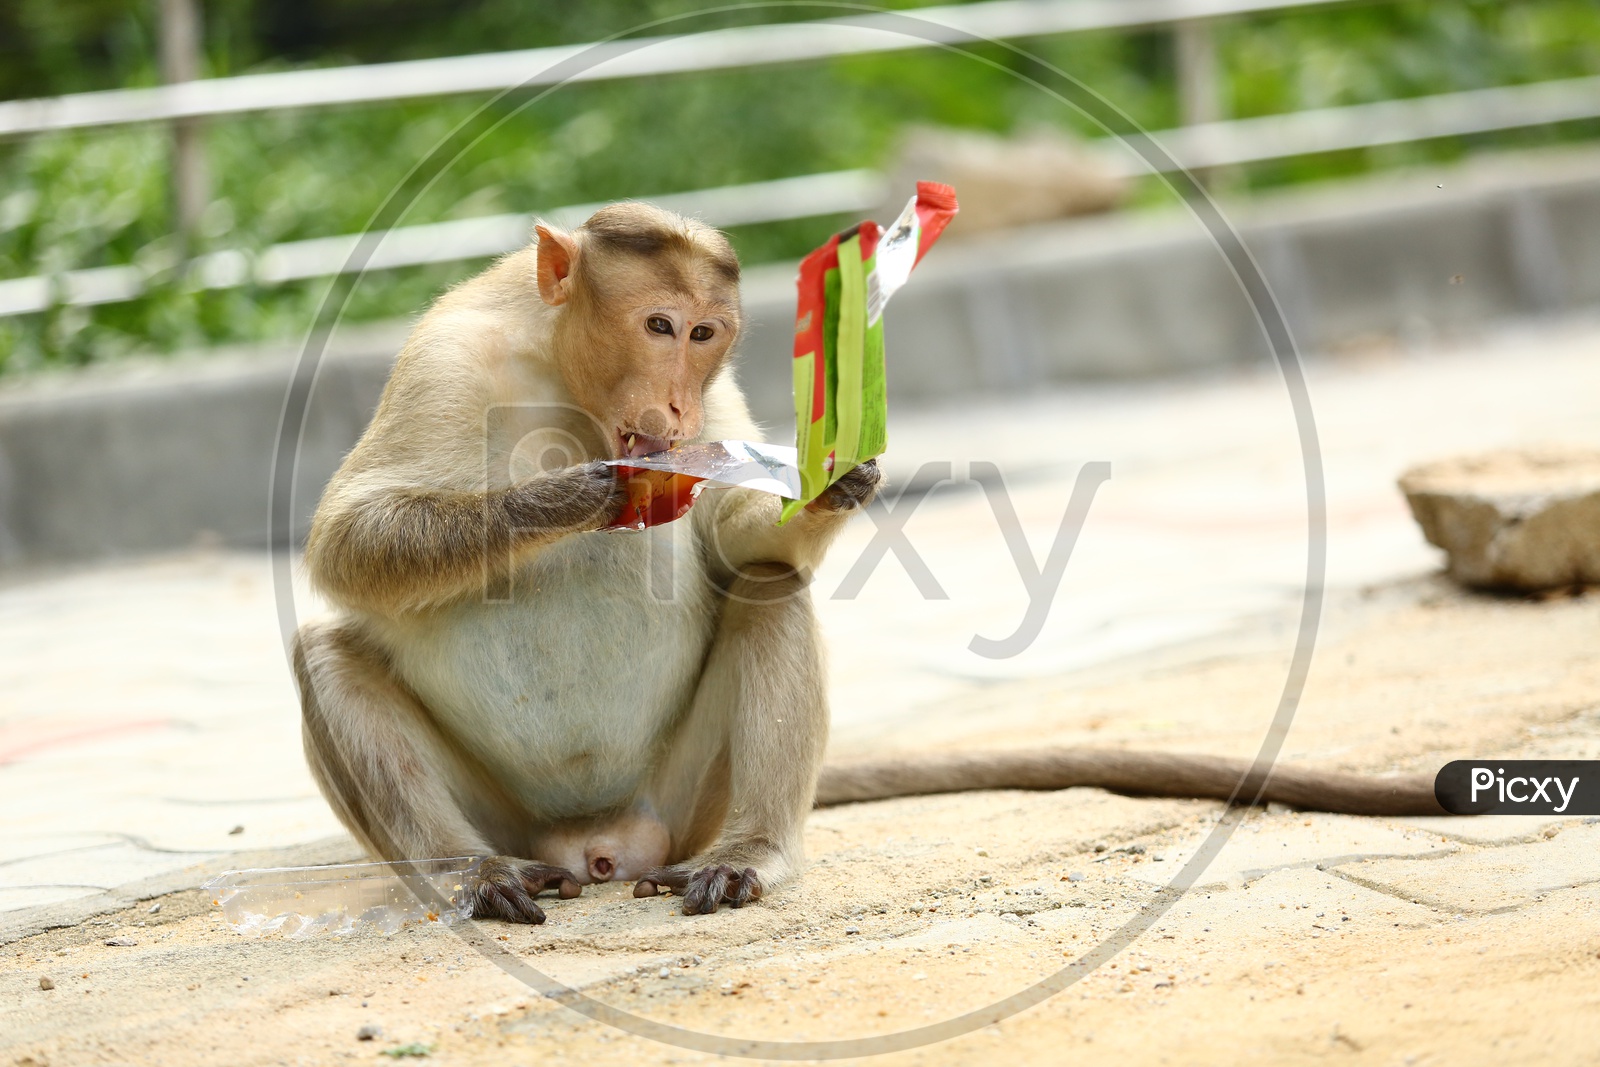 Monkey Or Macaque  in a Zoo  Eating Eateries Fed By Zoo Visitors